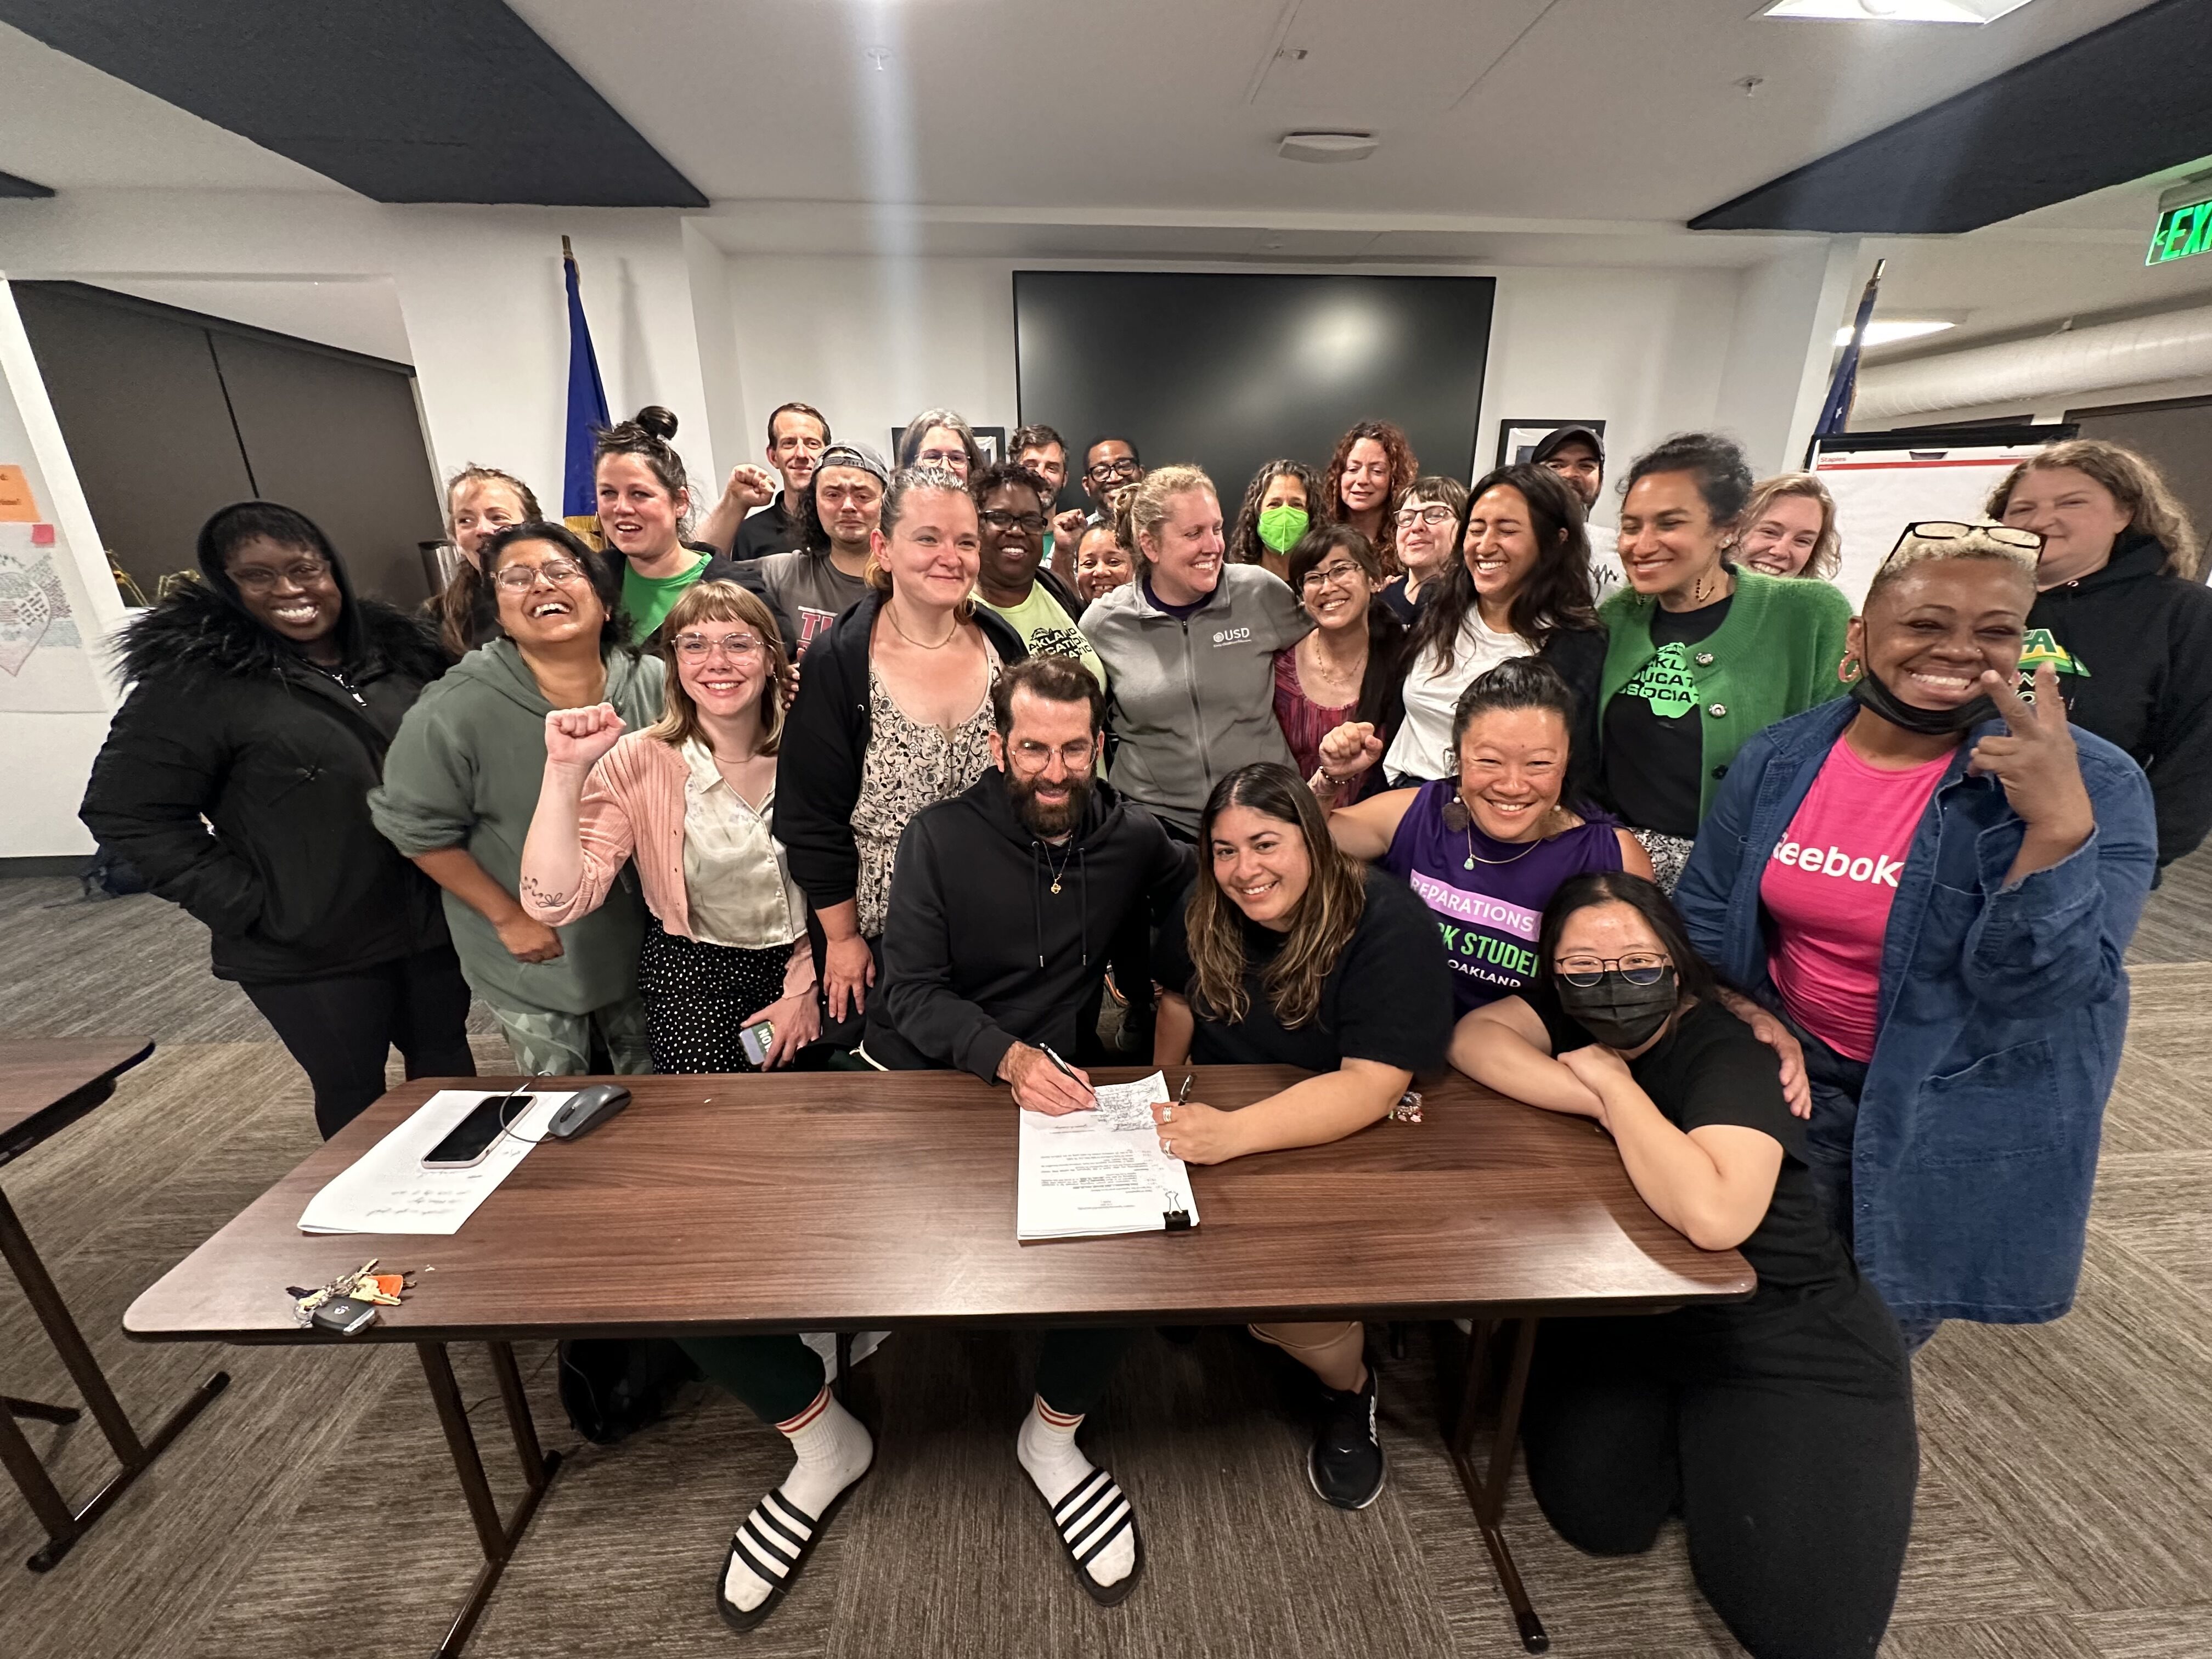 OEA’s bargaining team, led by Vilma Serrano and Timothy Douglas, signing their historic agreement at 3 o’clock in the morning.